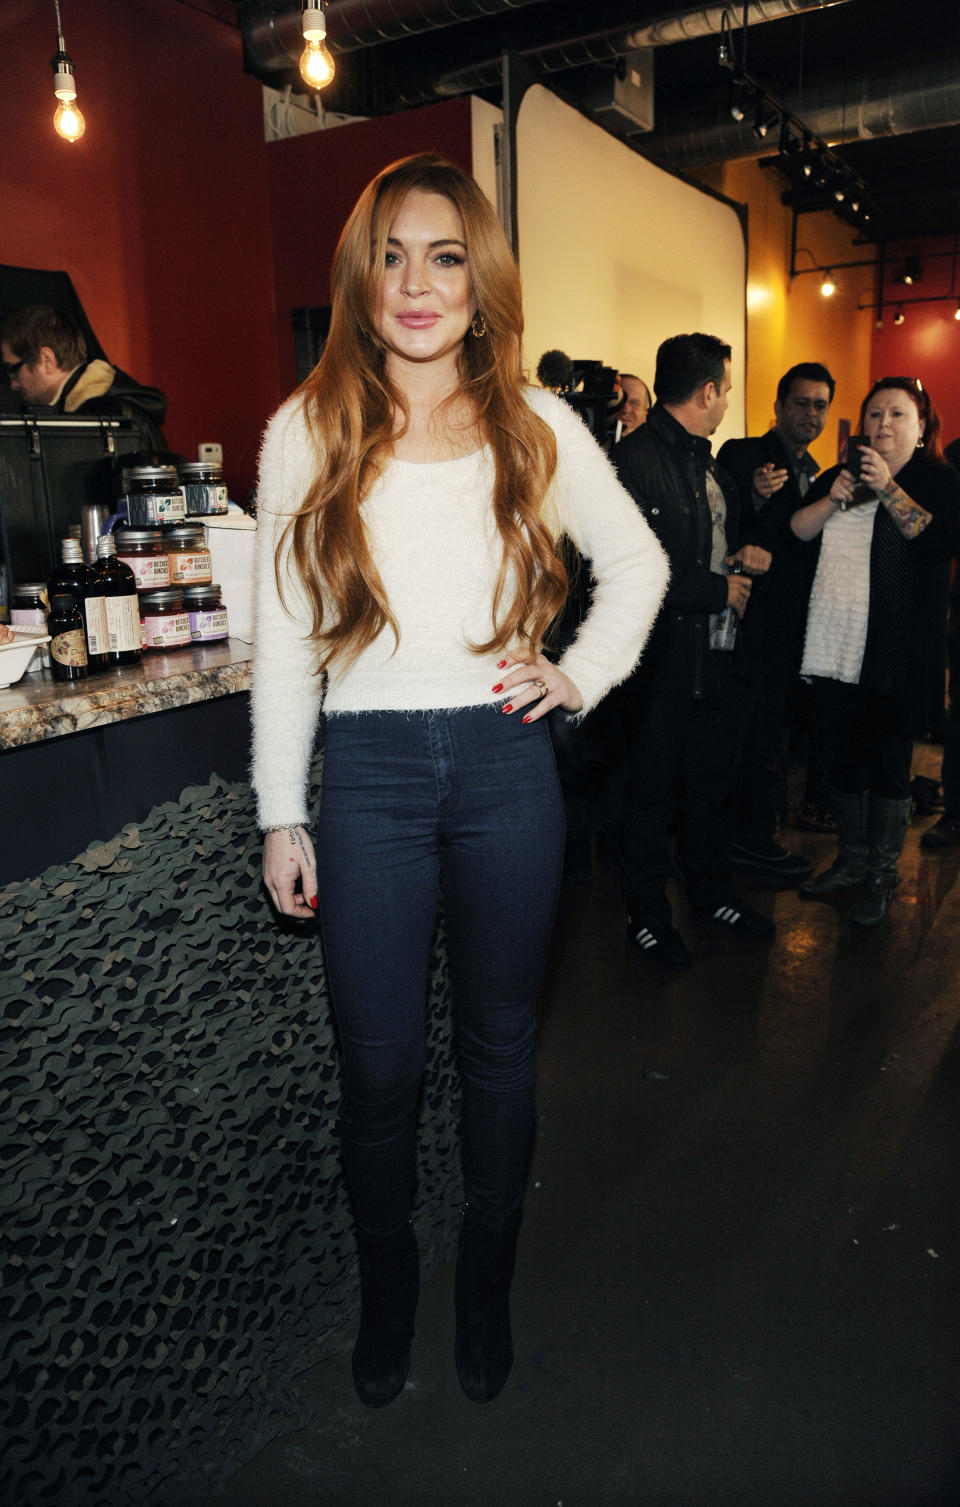 Actress Lindsay Lohan poses following a news conference at the 2014 Sundance Film Festival, Monday, Jan. 20, 2014, in Park City, Utah. Producer Randall Emmett and Lohan announced the forthcoming production of a new film, "Inconceivable," in which Lohan will star and co-produce. (Photo by Chris Pizzello/Invision/AP)